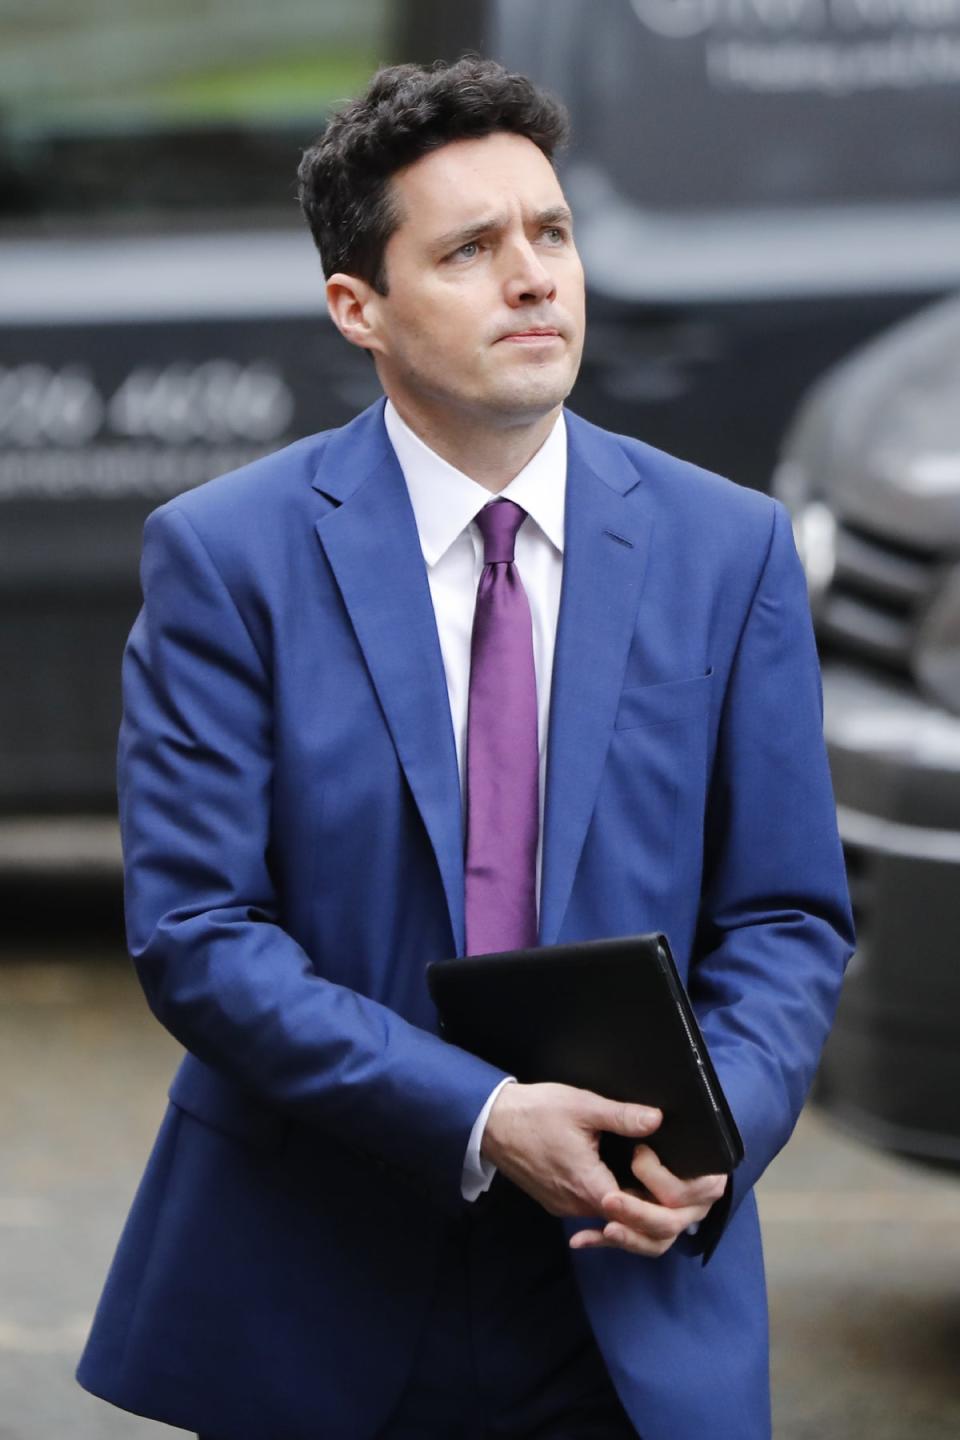 Rail minister Huw Merriman (AFP via Getty Images)